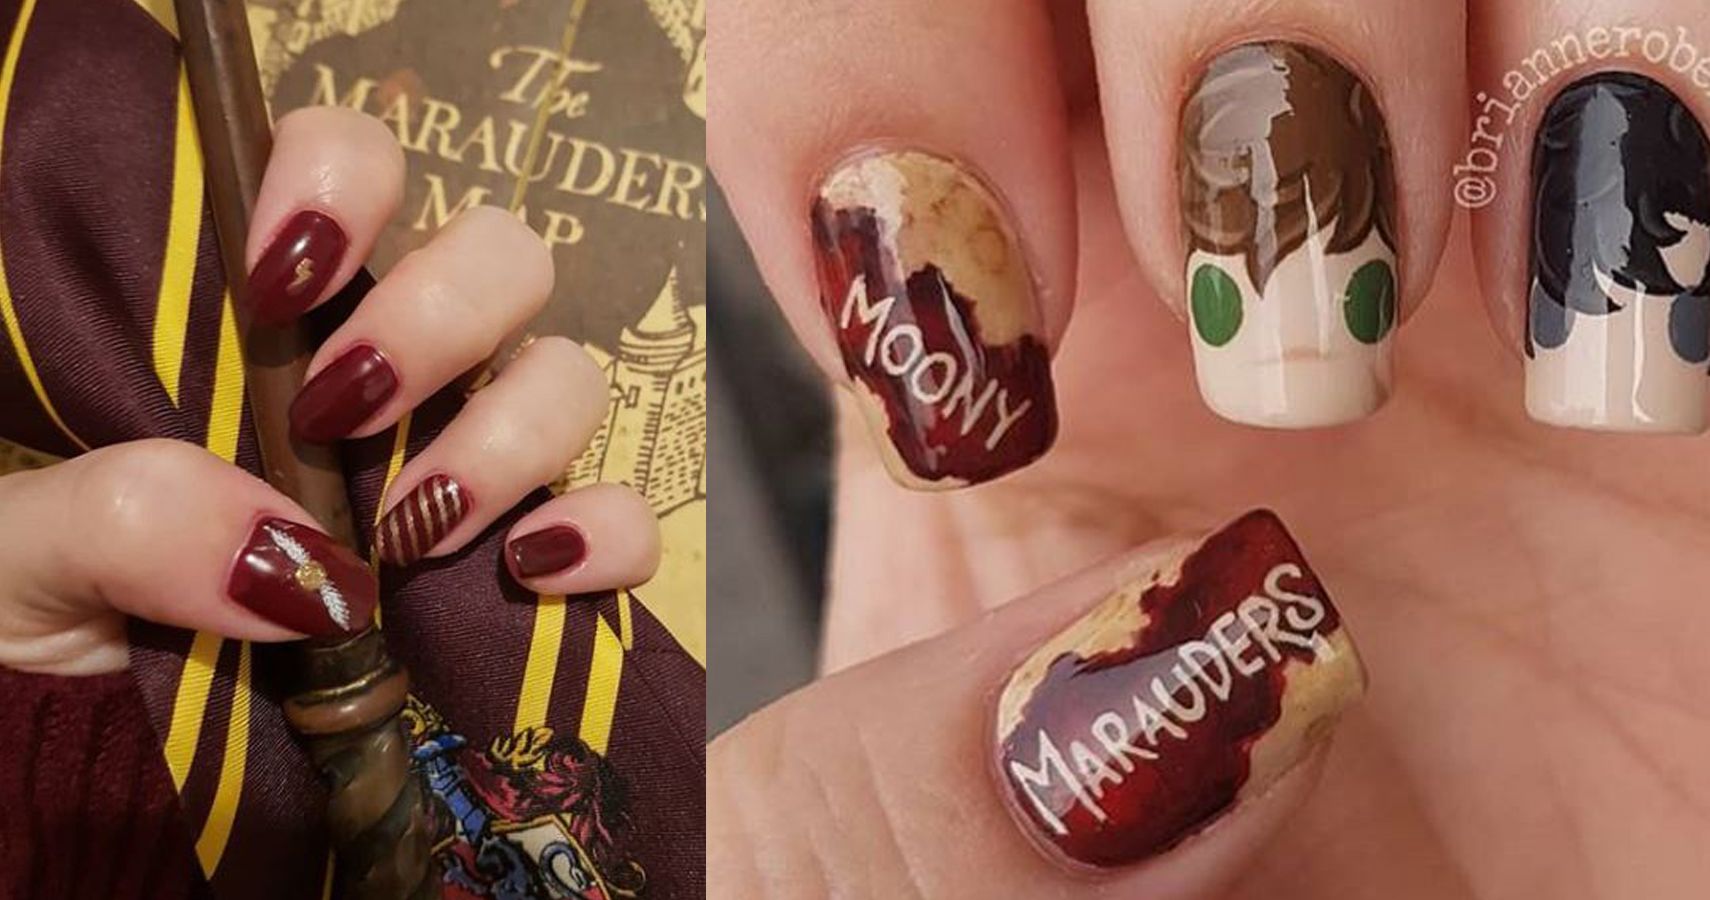 Harry Potter Acrylic Nail Art Design with Hand Painted Easy Nail Art -  Collab with Michelle Manis - YouTube